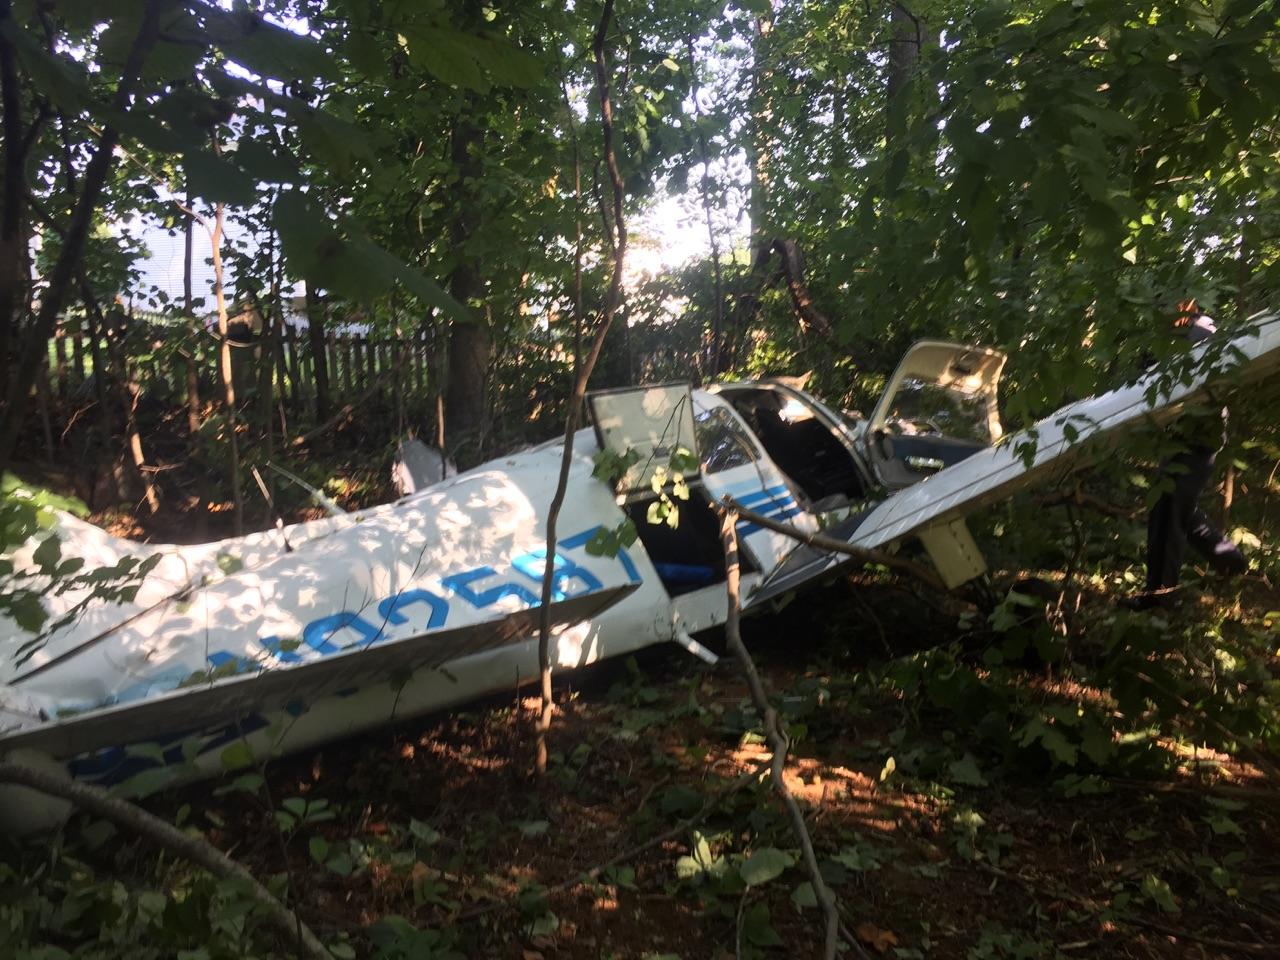 Small plane crashes in Prince William County on Sunday